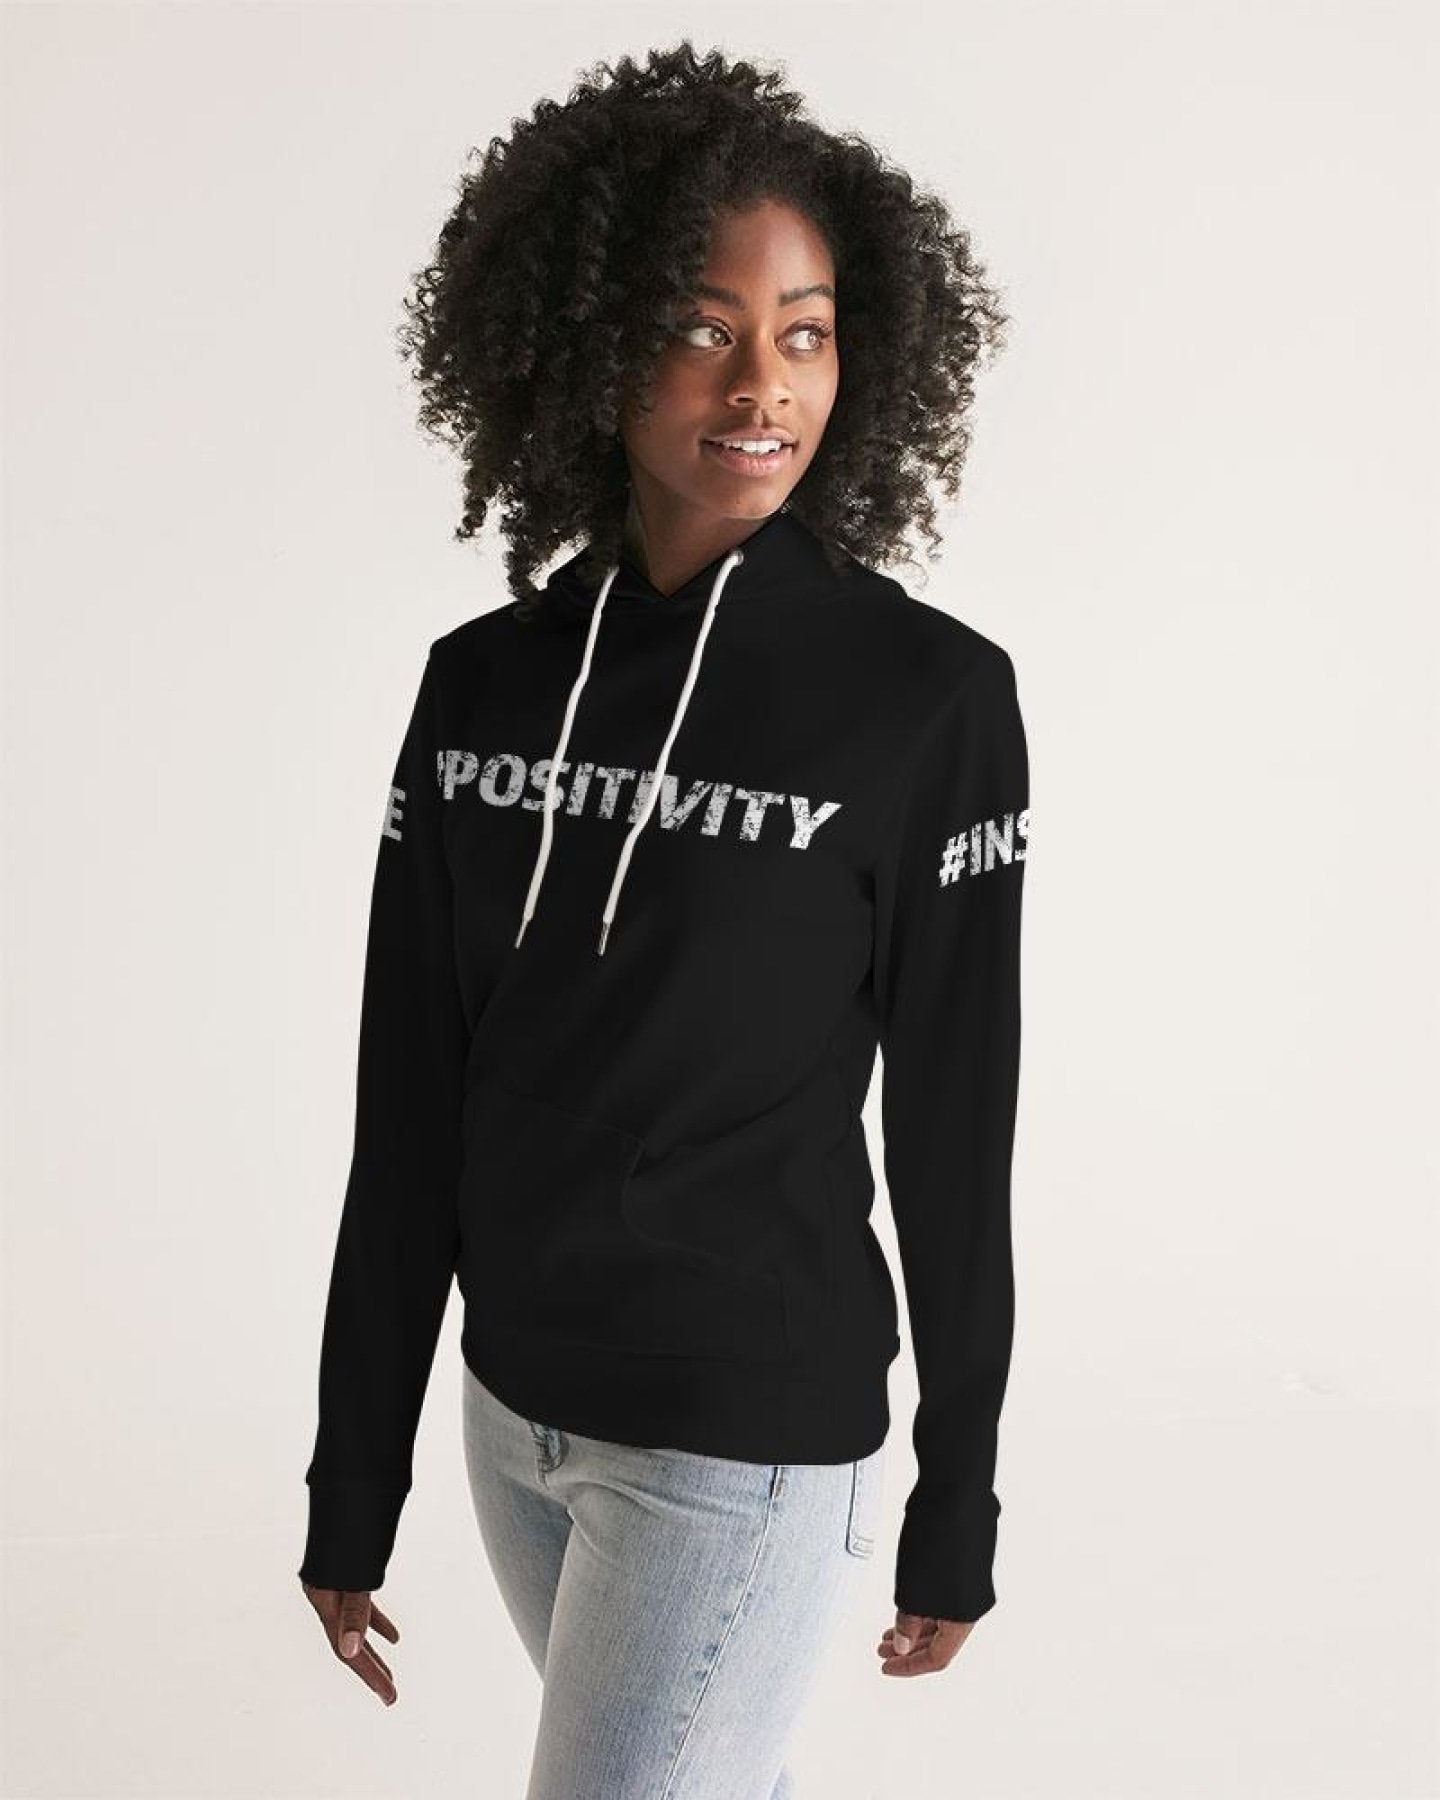 Wear-resistant Inspire Positivity Hoodie - All Good Laces